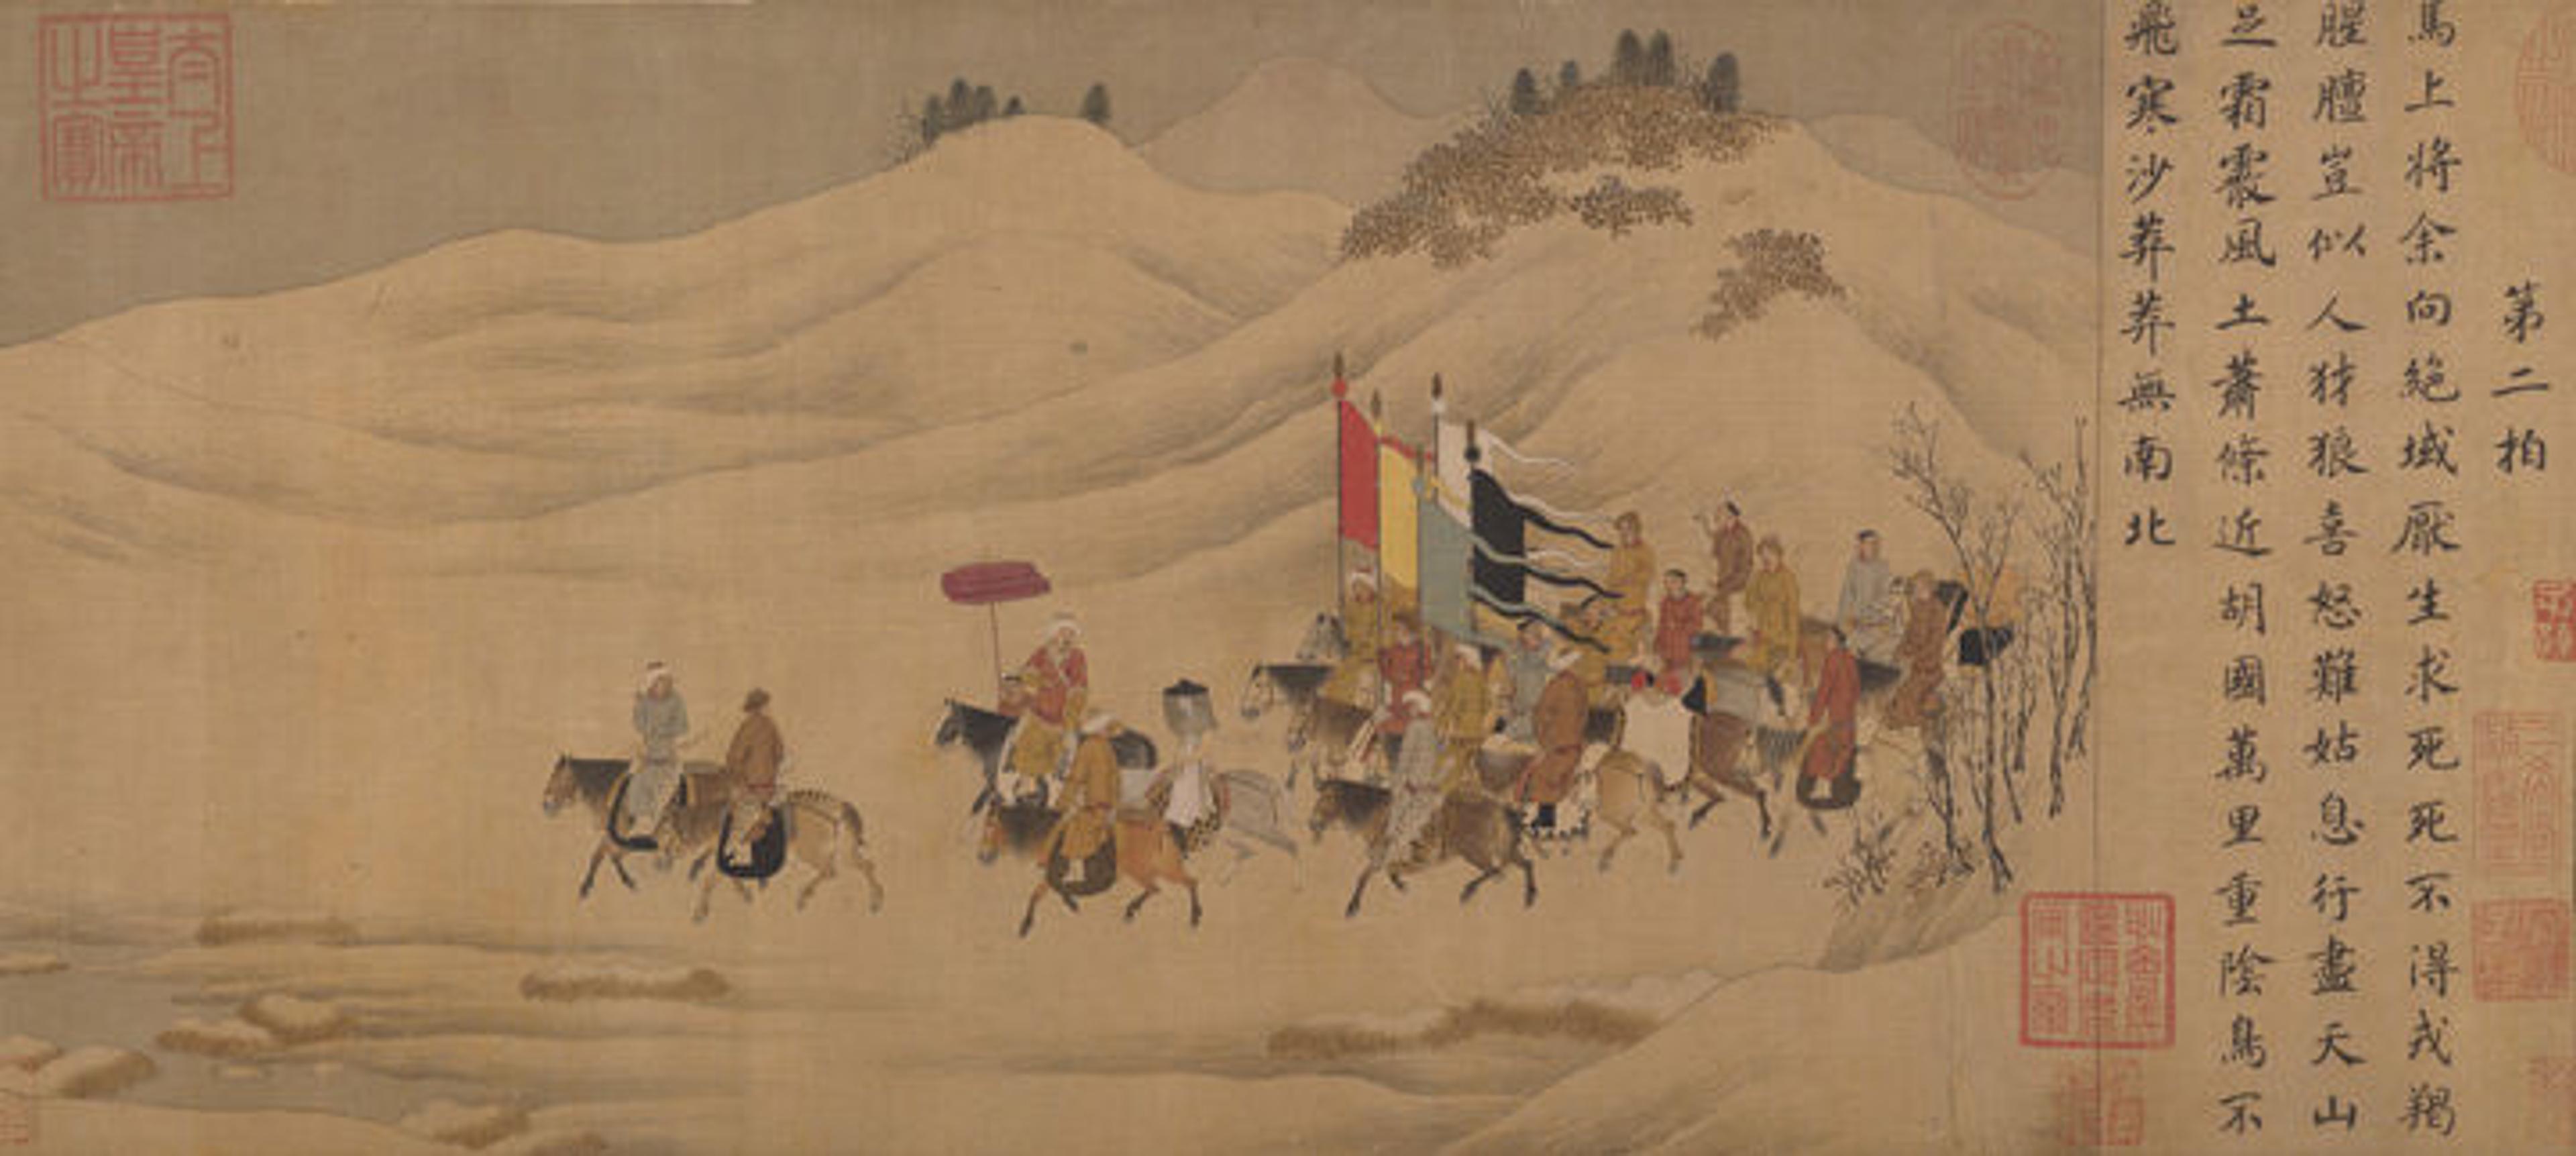 15th-century Chinese handscroll depicting a battle scene against a backdrop of snowy mountains